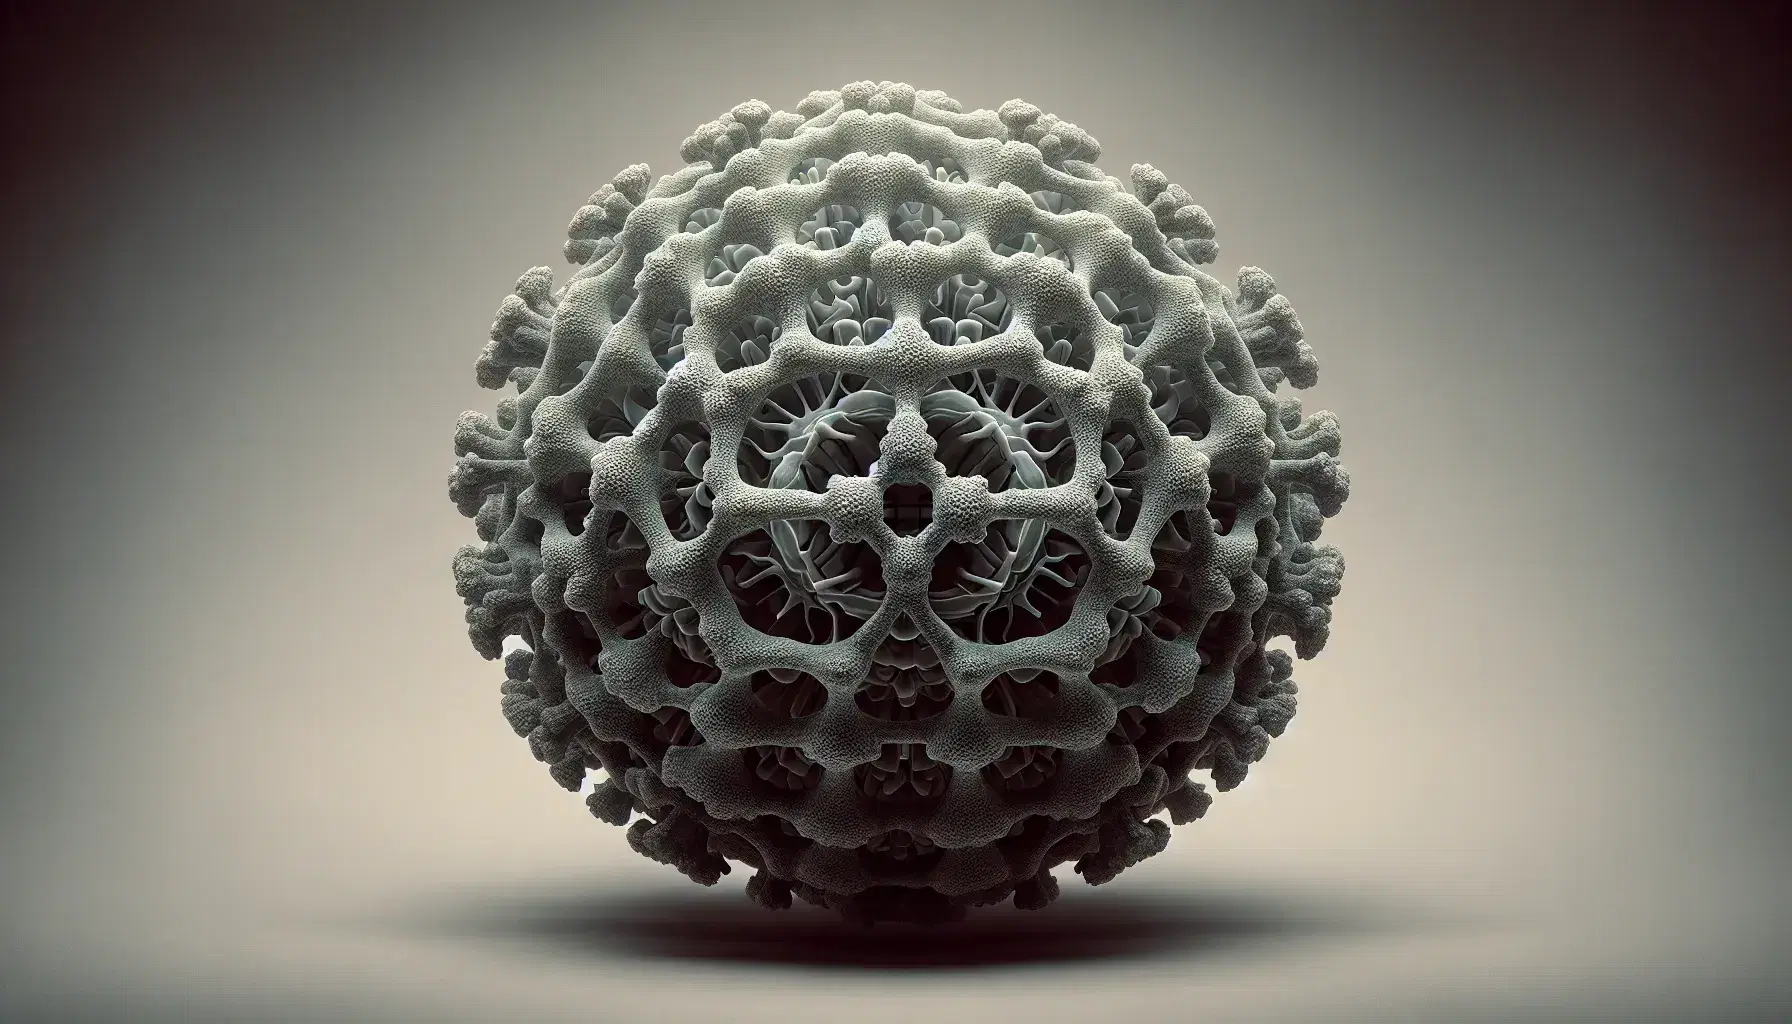 Detailed close-up of a spherical virus particle with a symmetrical protein capsid and a thin, translucent viral envelope surrounding a coiled genome.